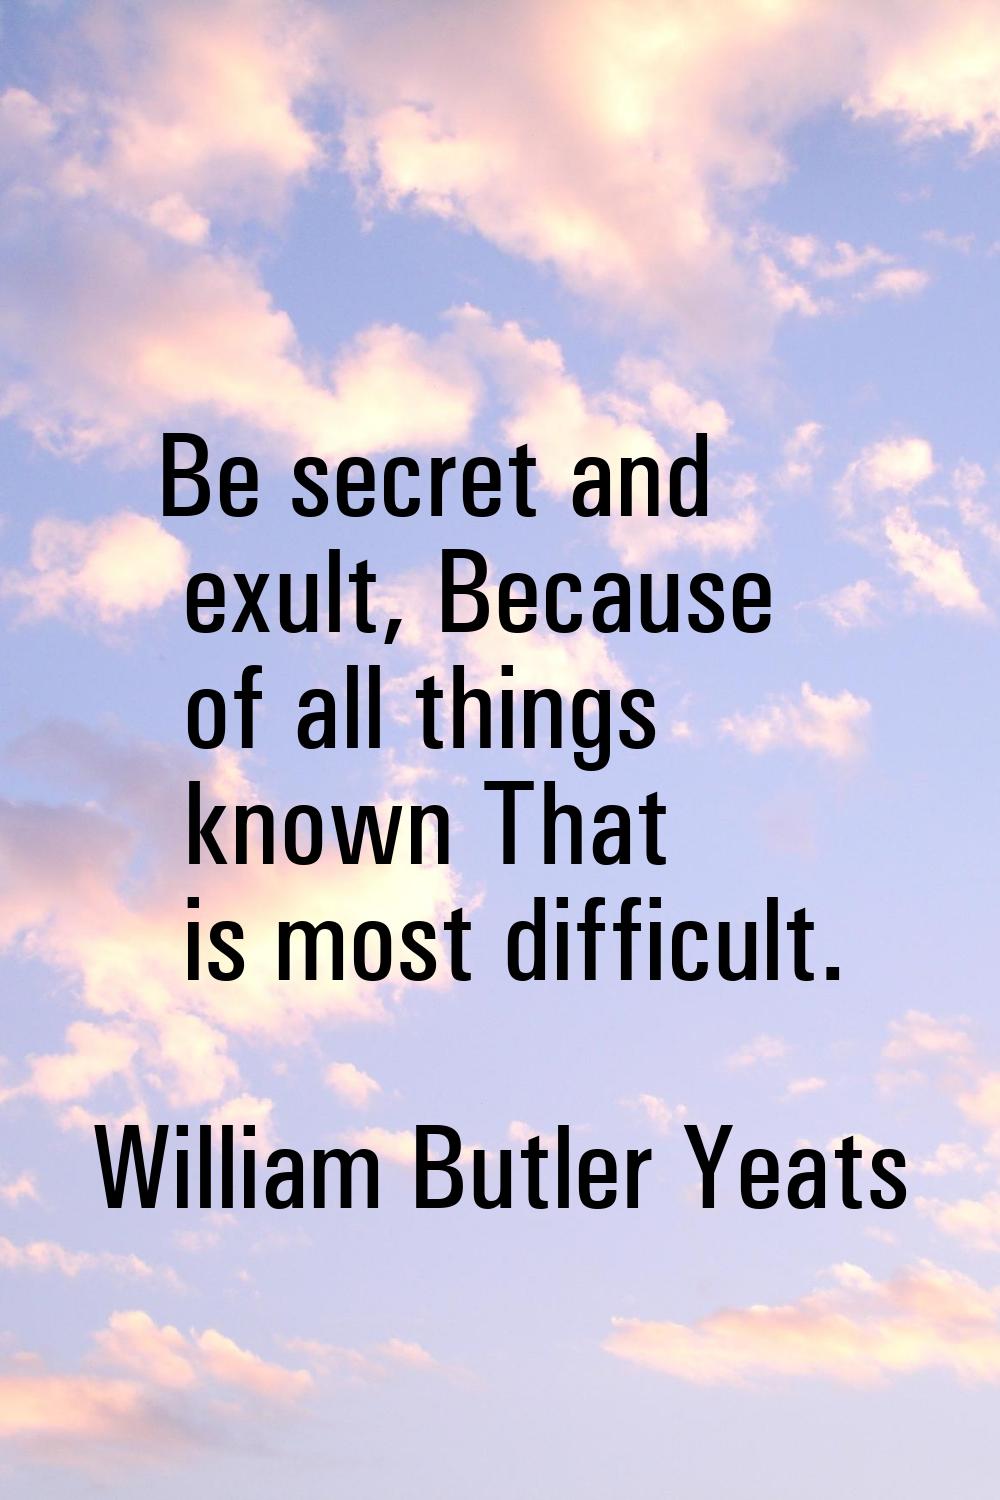 Be secret and exult, Because of all things known That is most difficult.